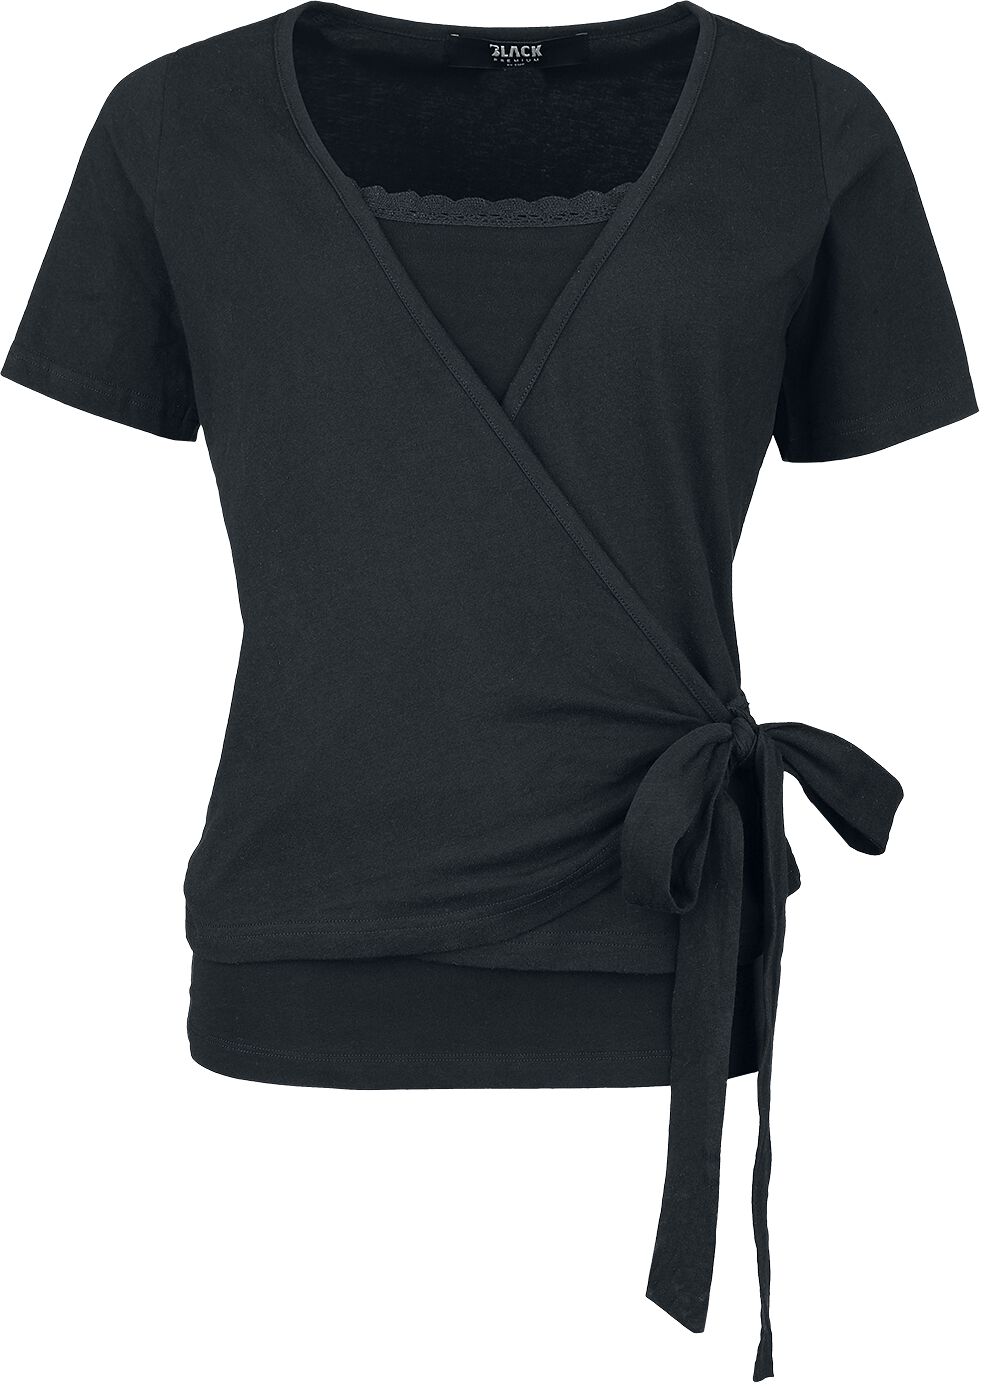 Image of T-Shirt di Black Premium by EMP - Double-layer t-shirt with knot - M a XXL - Donna - nero